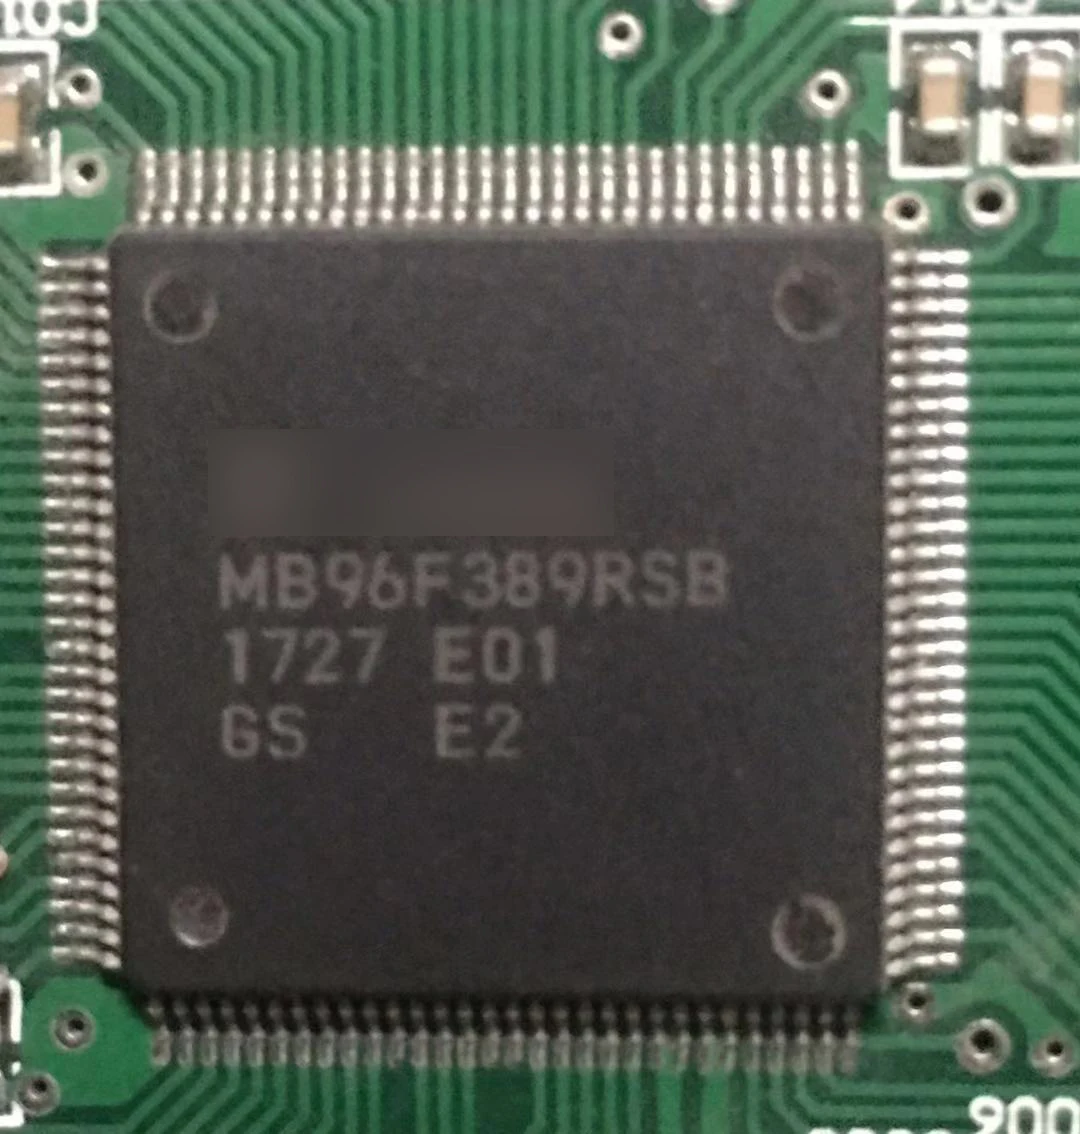 1PCS/lot  MB96F389RSB MB96F389 car computer board cpu chip  100% new imported original   IC Chips fast delivery